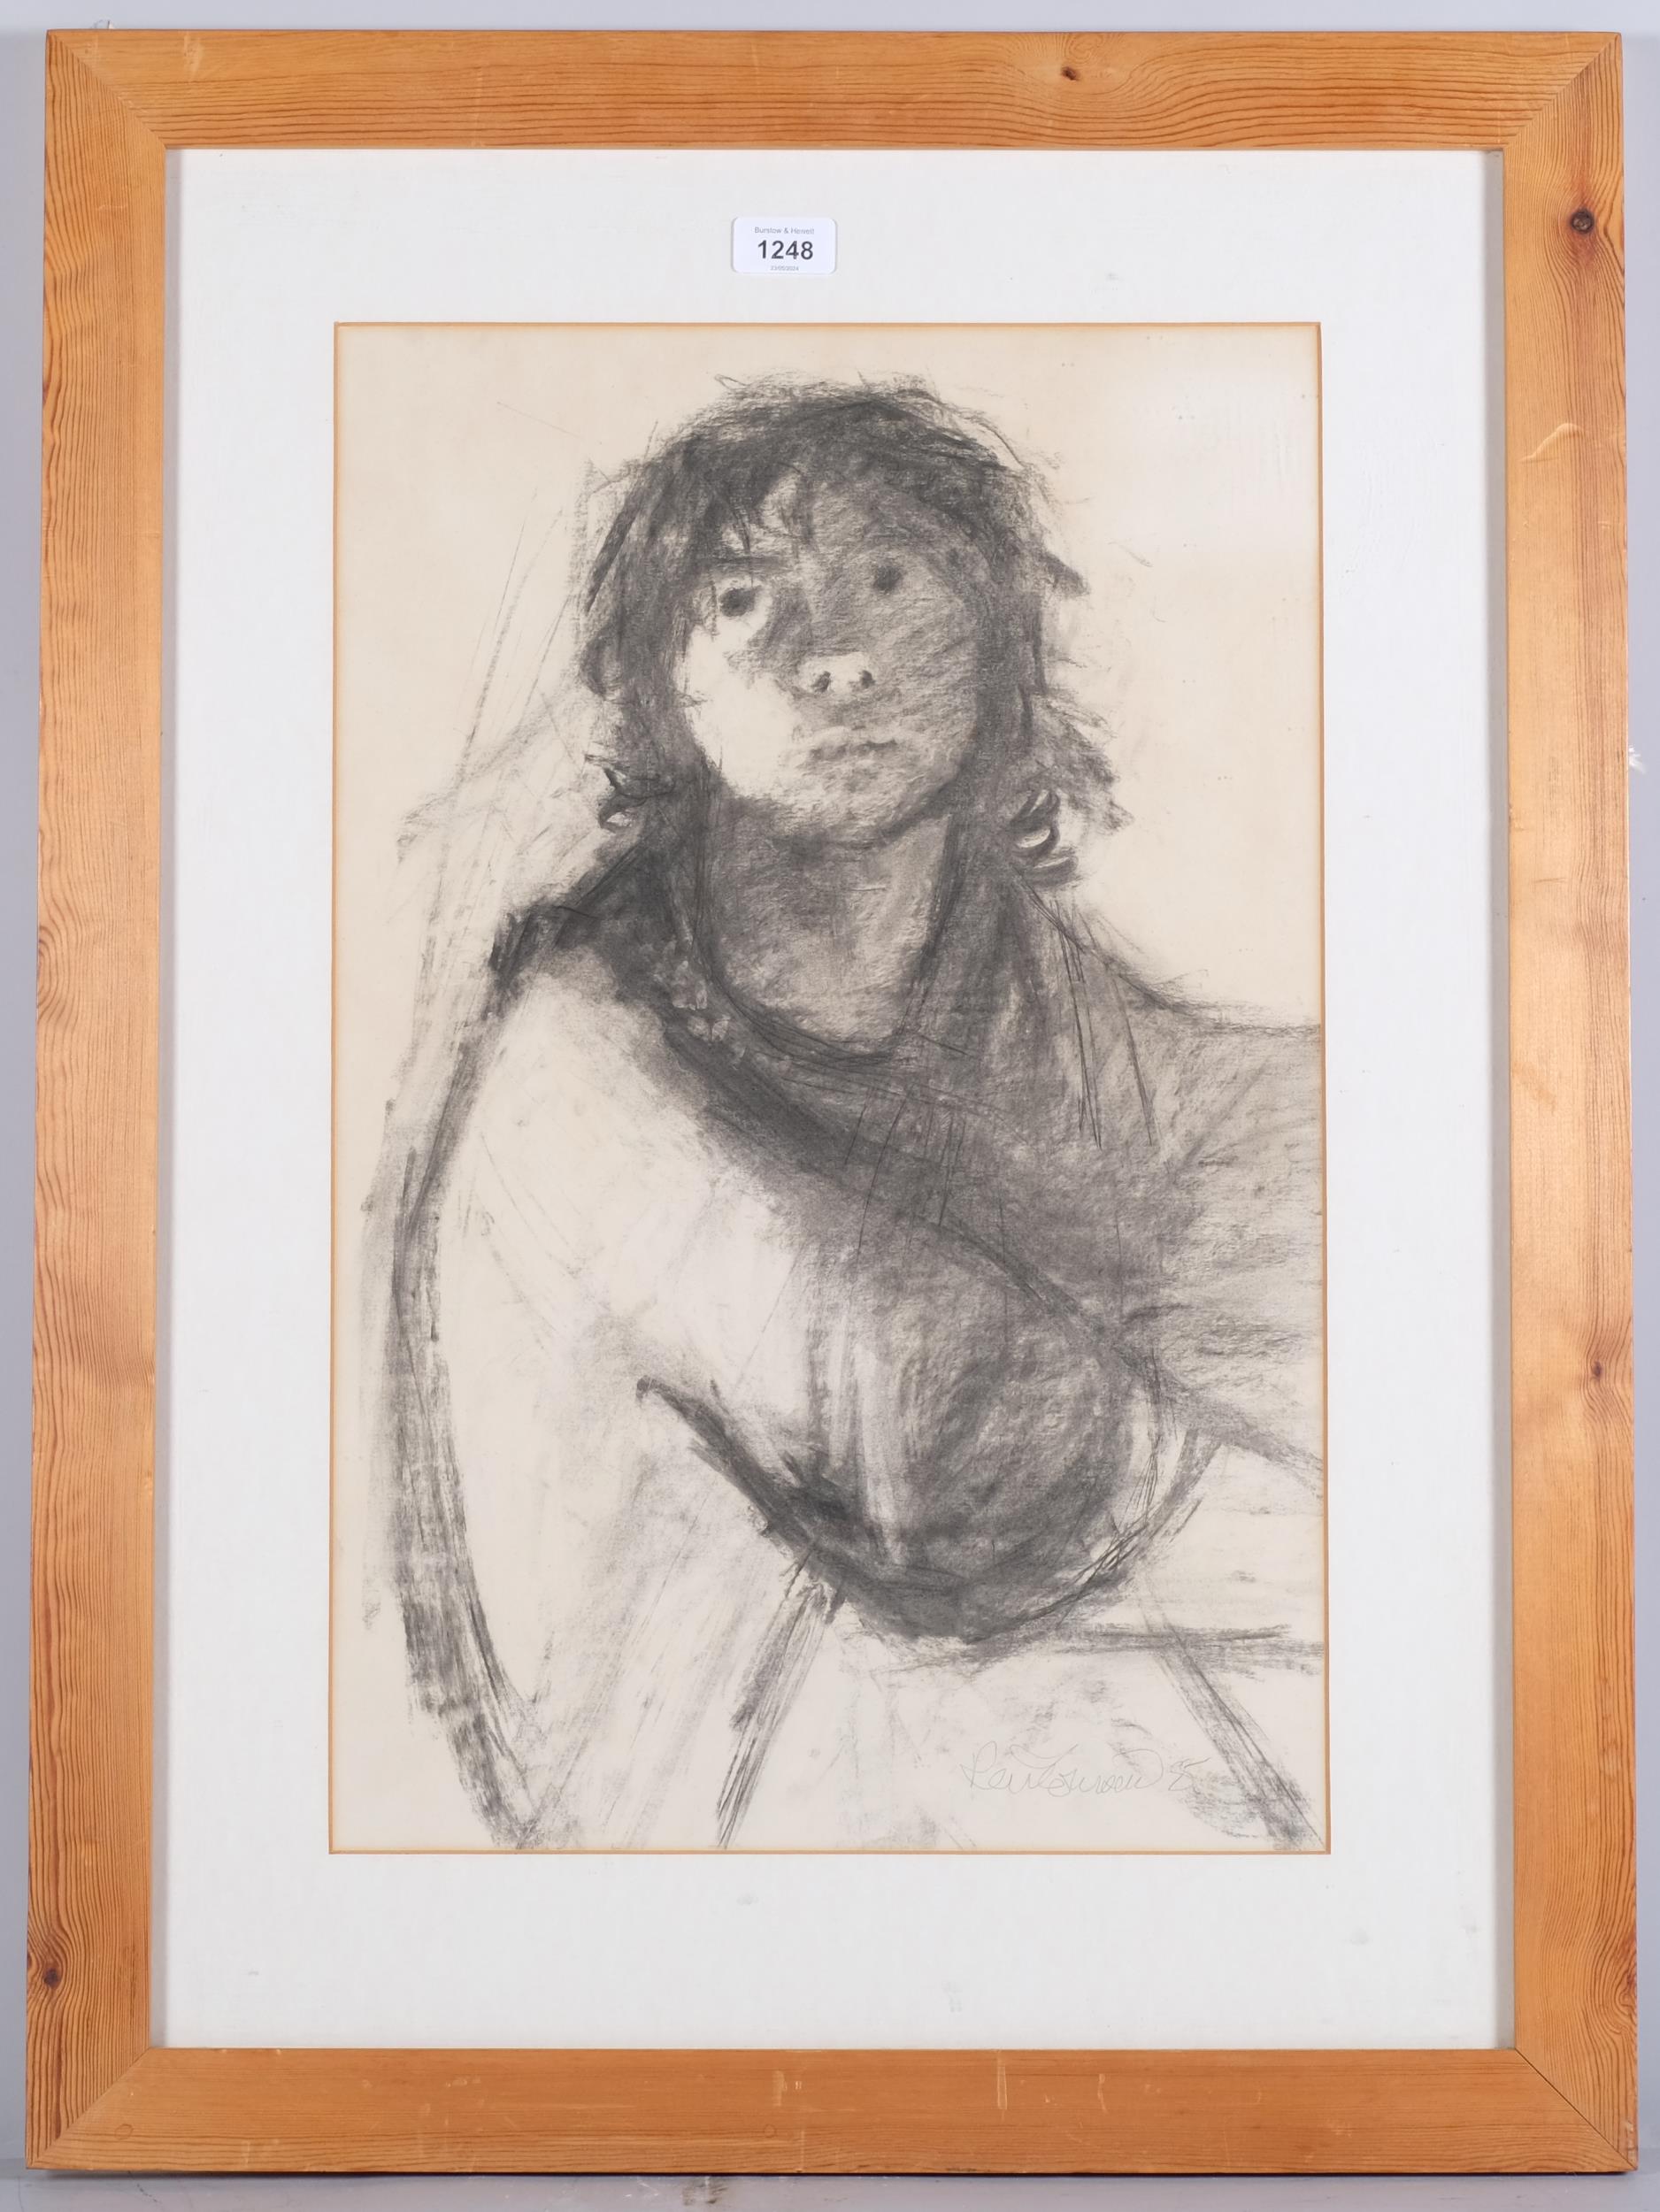 Kenneth Townsend, portrait "Biddy", charcoal on paper, signed, 56cm x 36cm, framed - Image 2 of 4